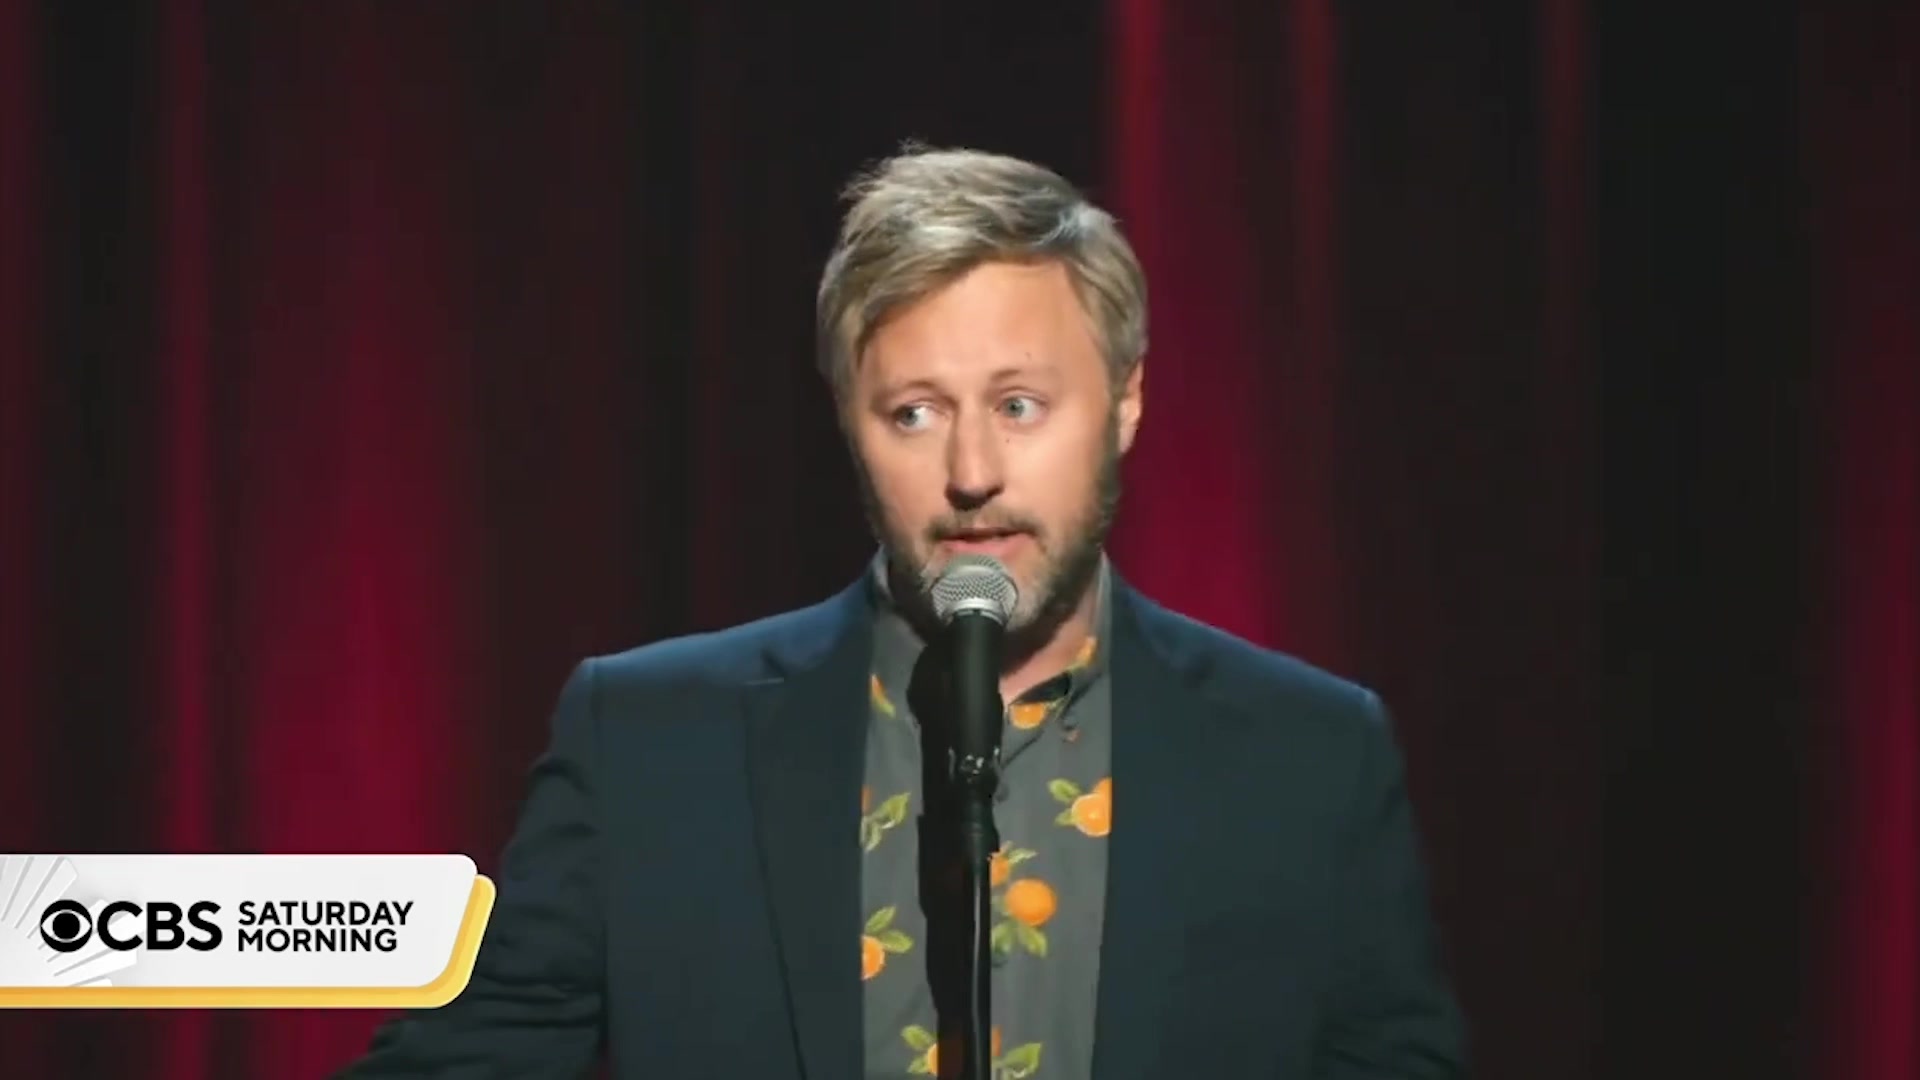 Actor and stand-up comedian Rory Scovel has appeared in films alongside Amy Schumer and TV shows like Apple TV's "Physical." And critics are calling his latest special the best comedy special of the year. Dana Jacobson caught up with him to see how his artistic pursuits intertwine. #roryscovel #comedy #entertainment